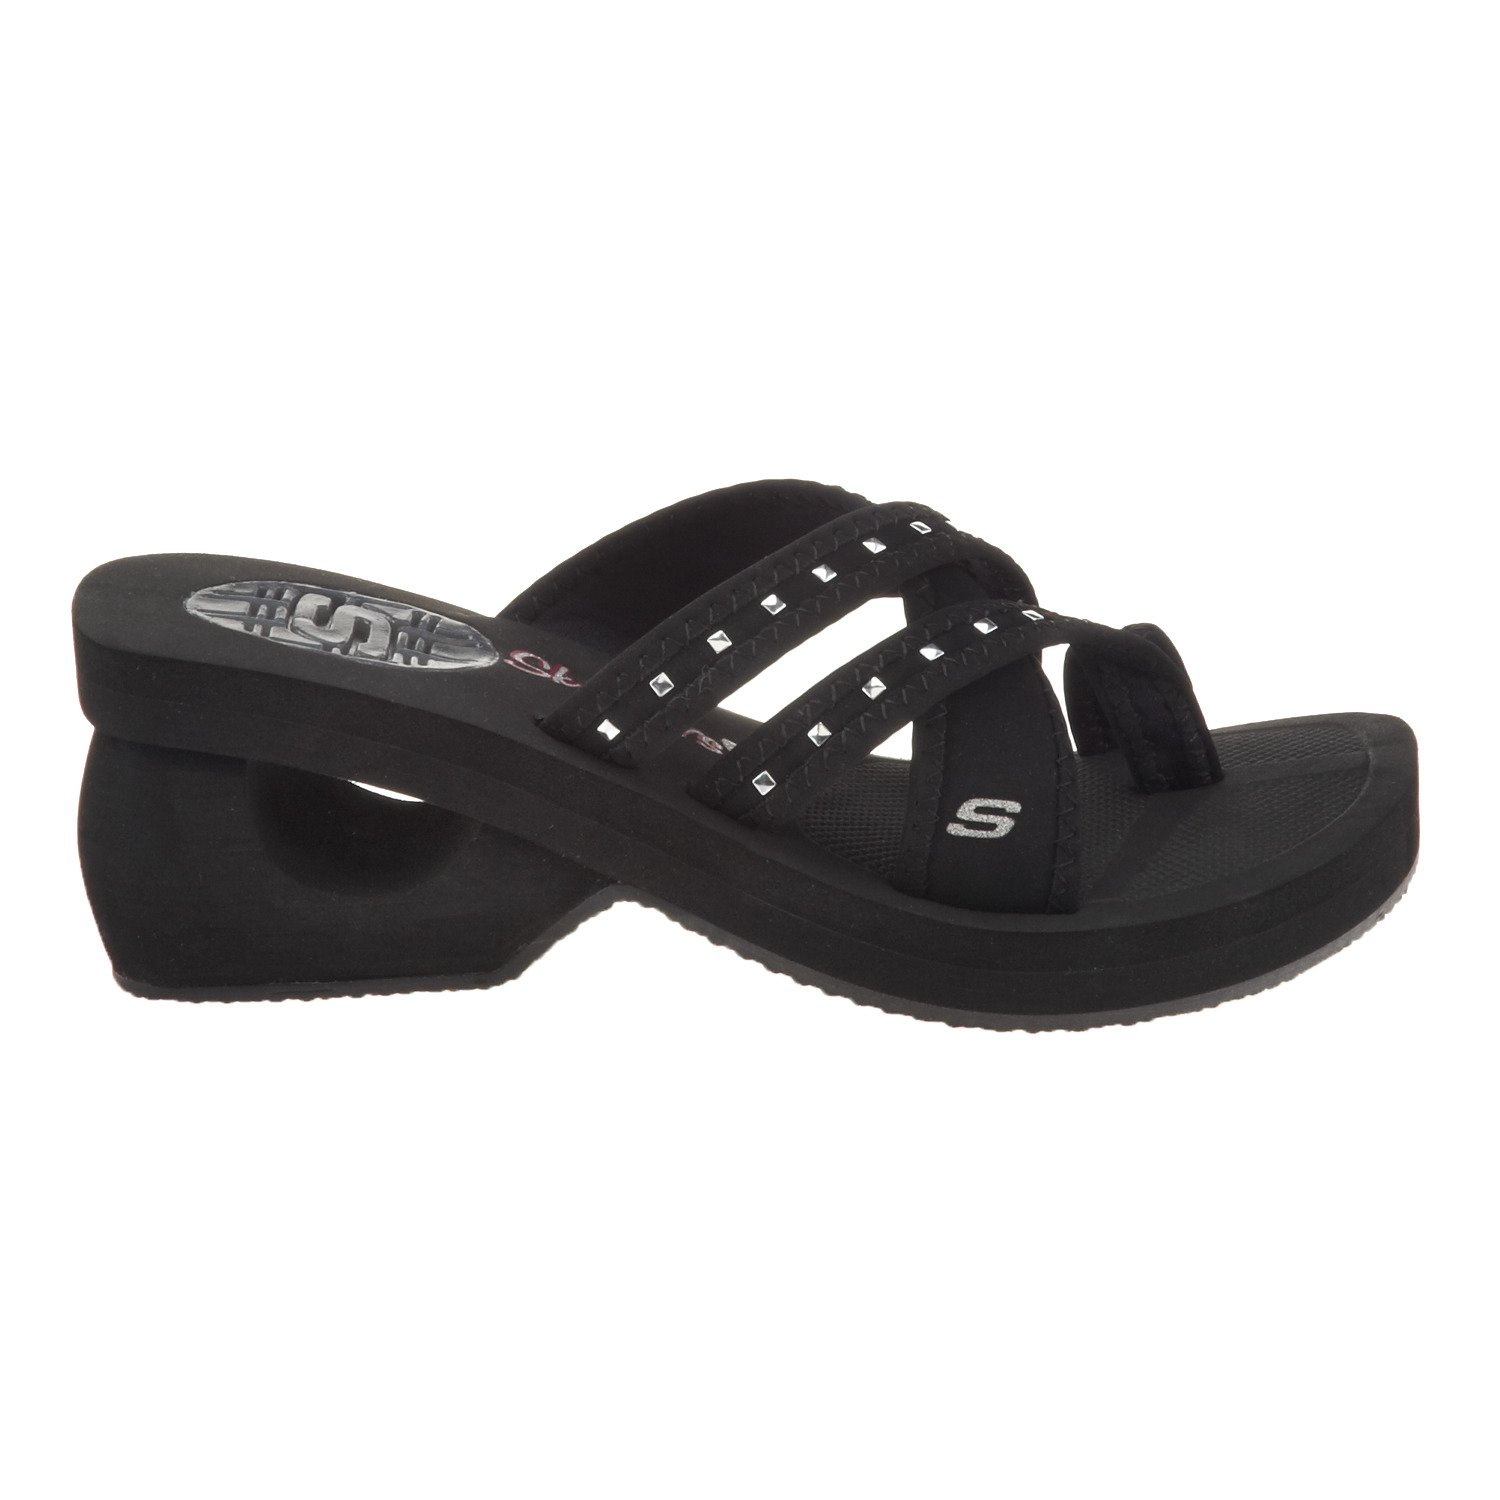 ... Reviews for SKECHERS SKECHERS Women's Cyclers Gleamers Wedge Sandals